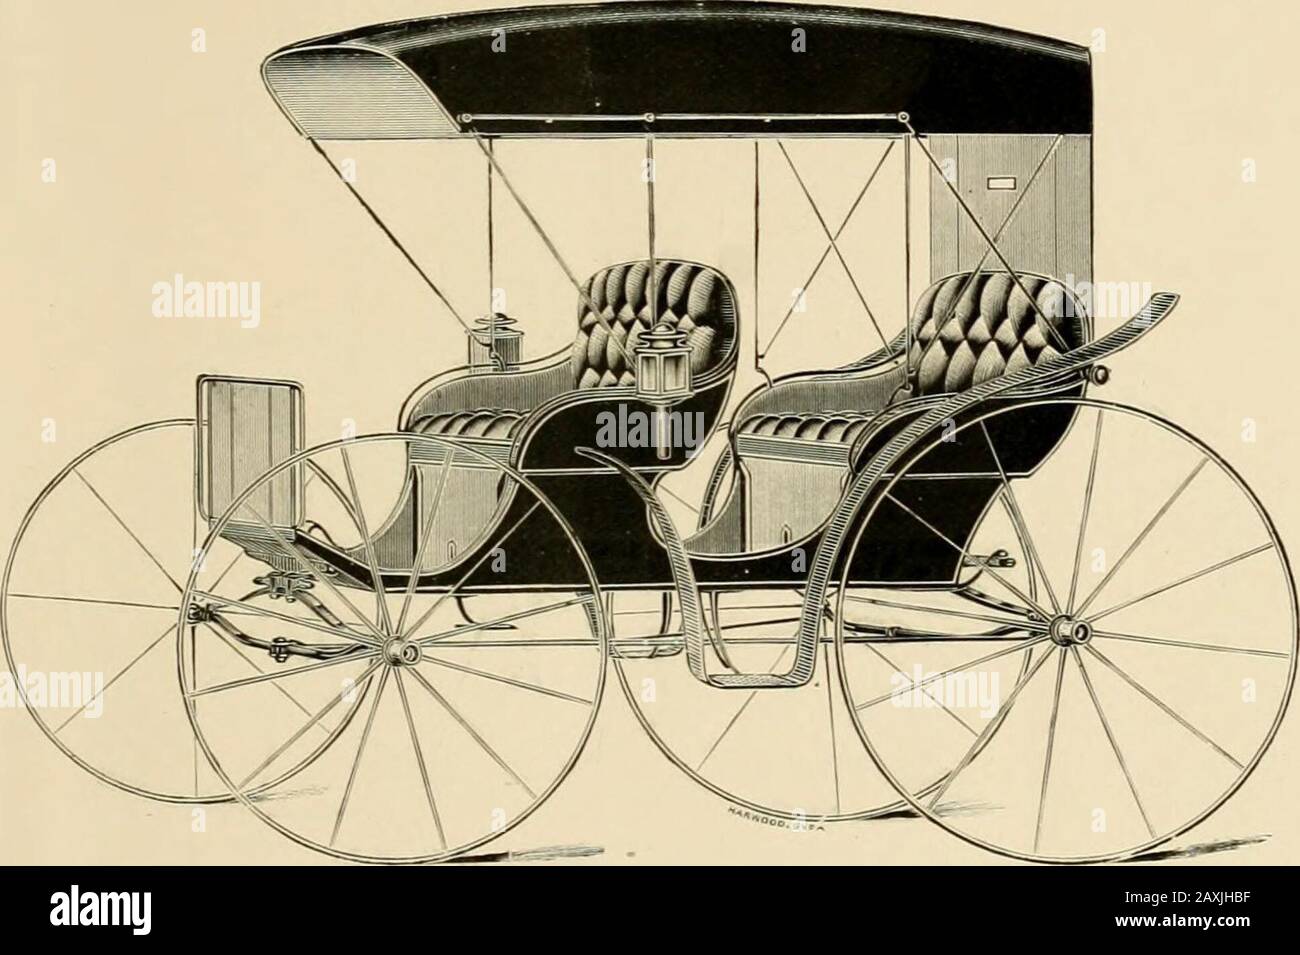 Catalogue for 1896. . No. 735. COMMON SENSE THREE SEATER. Track 4 ft. 8 in. Body is obi in. by 36 in., Tj in. deep bat-k nl wluel house; is liuilt tlirouglimit same as 770. except it lias three seats, and isproportionately heavier and the two back seats are adjustable, so tli.-it cither cjr both may be taken off. or one taken off and theother placed in any part of the body to suit the requirements of the occasion. Trinimiiigs and Painting same as on No. 770.This job is designeil more especially for hotels, liverymen, summer resorts, etc.. and is without doubt the most complete, mostconvenient Stock Photo